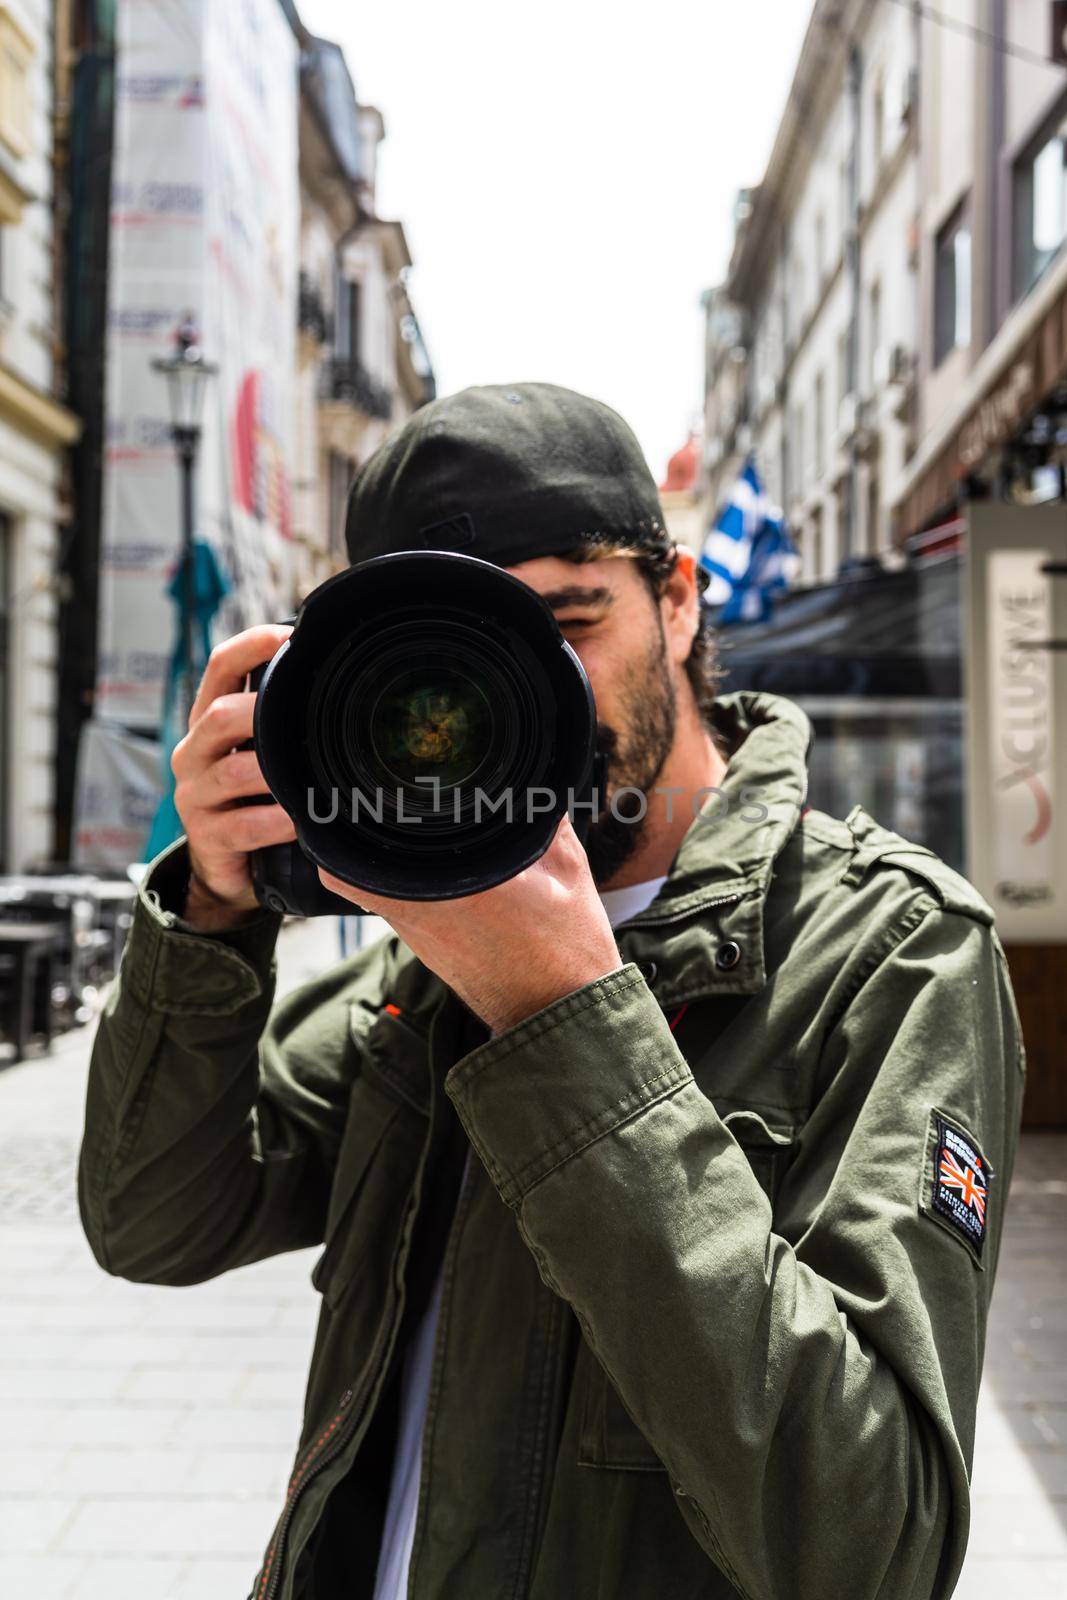 Street photographer taking photos with DSLR camera and telephoto lens in Old Town of Bucharest, Romania, 2020